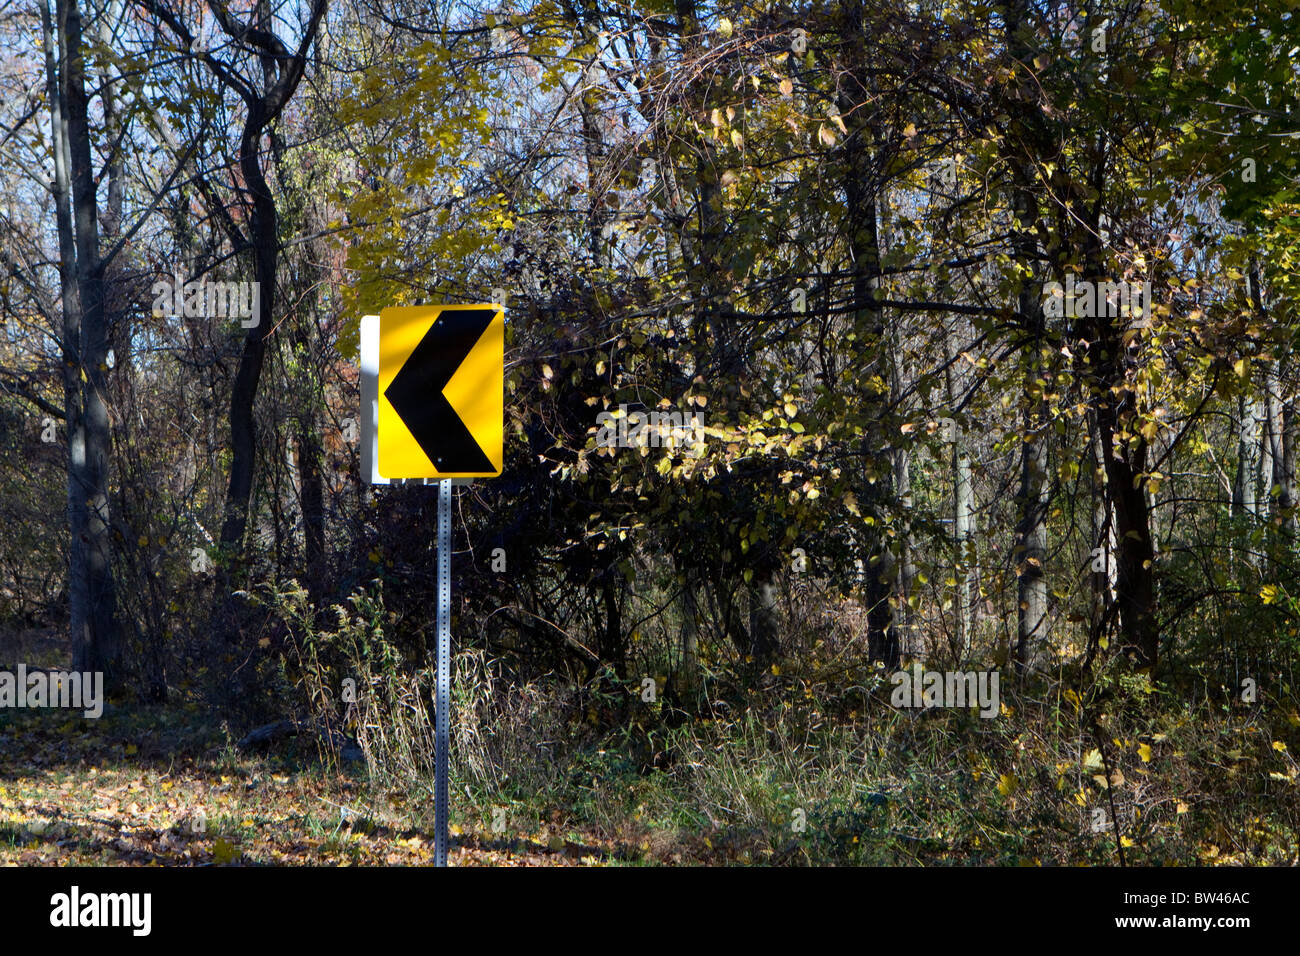 A bend in the road sign. A directional road sign. Driving road sign. Stock Photo